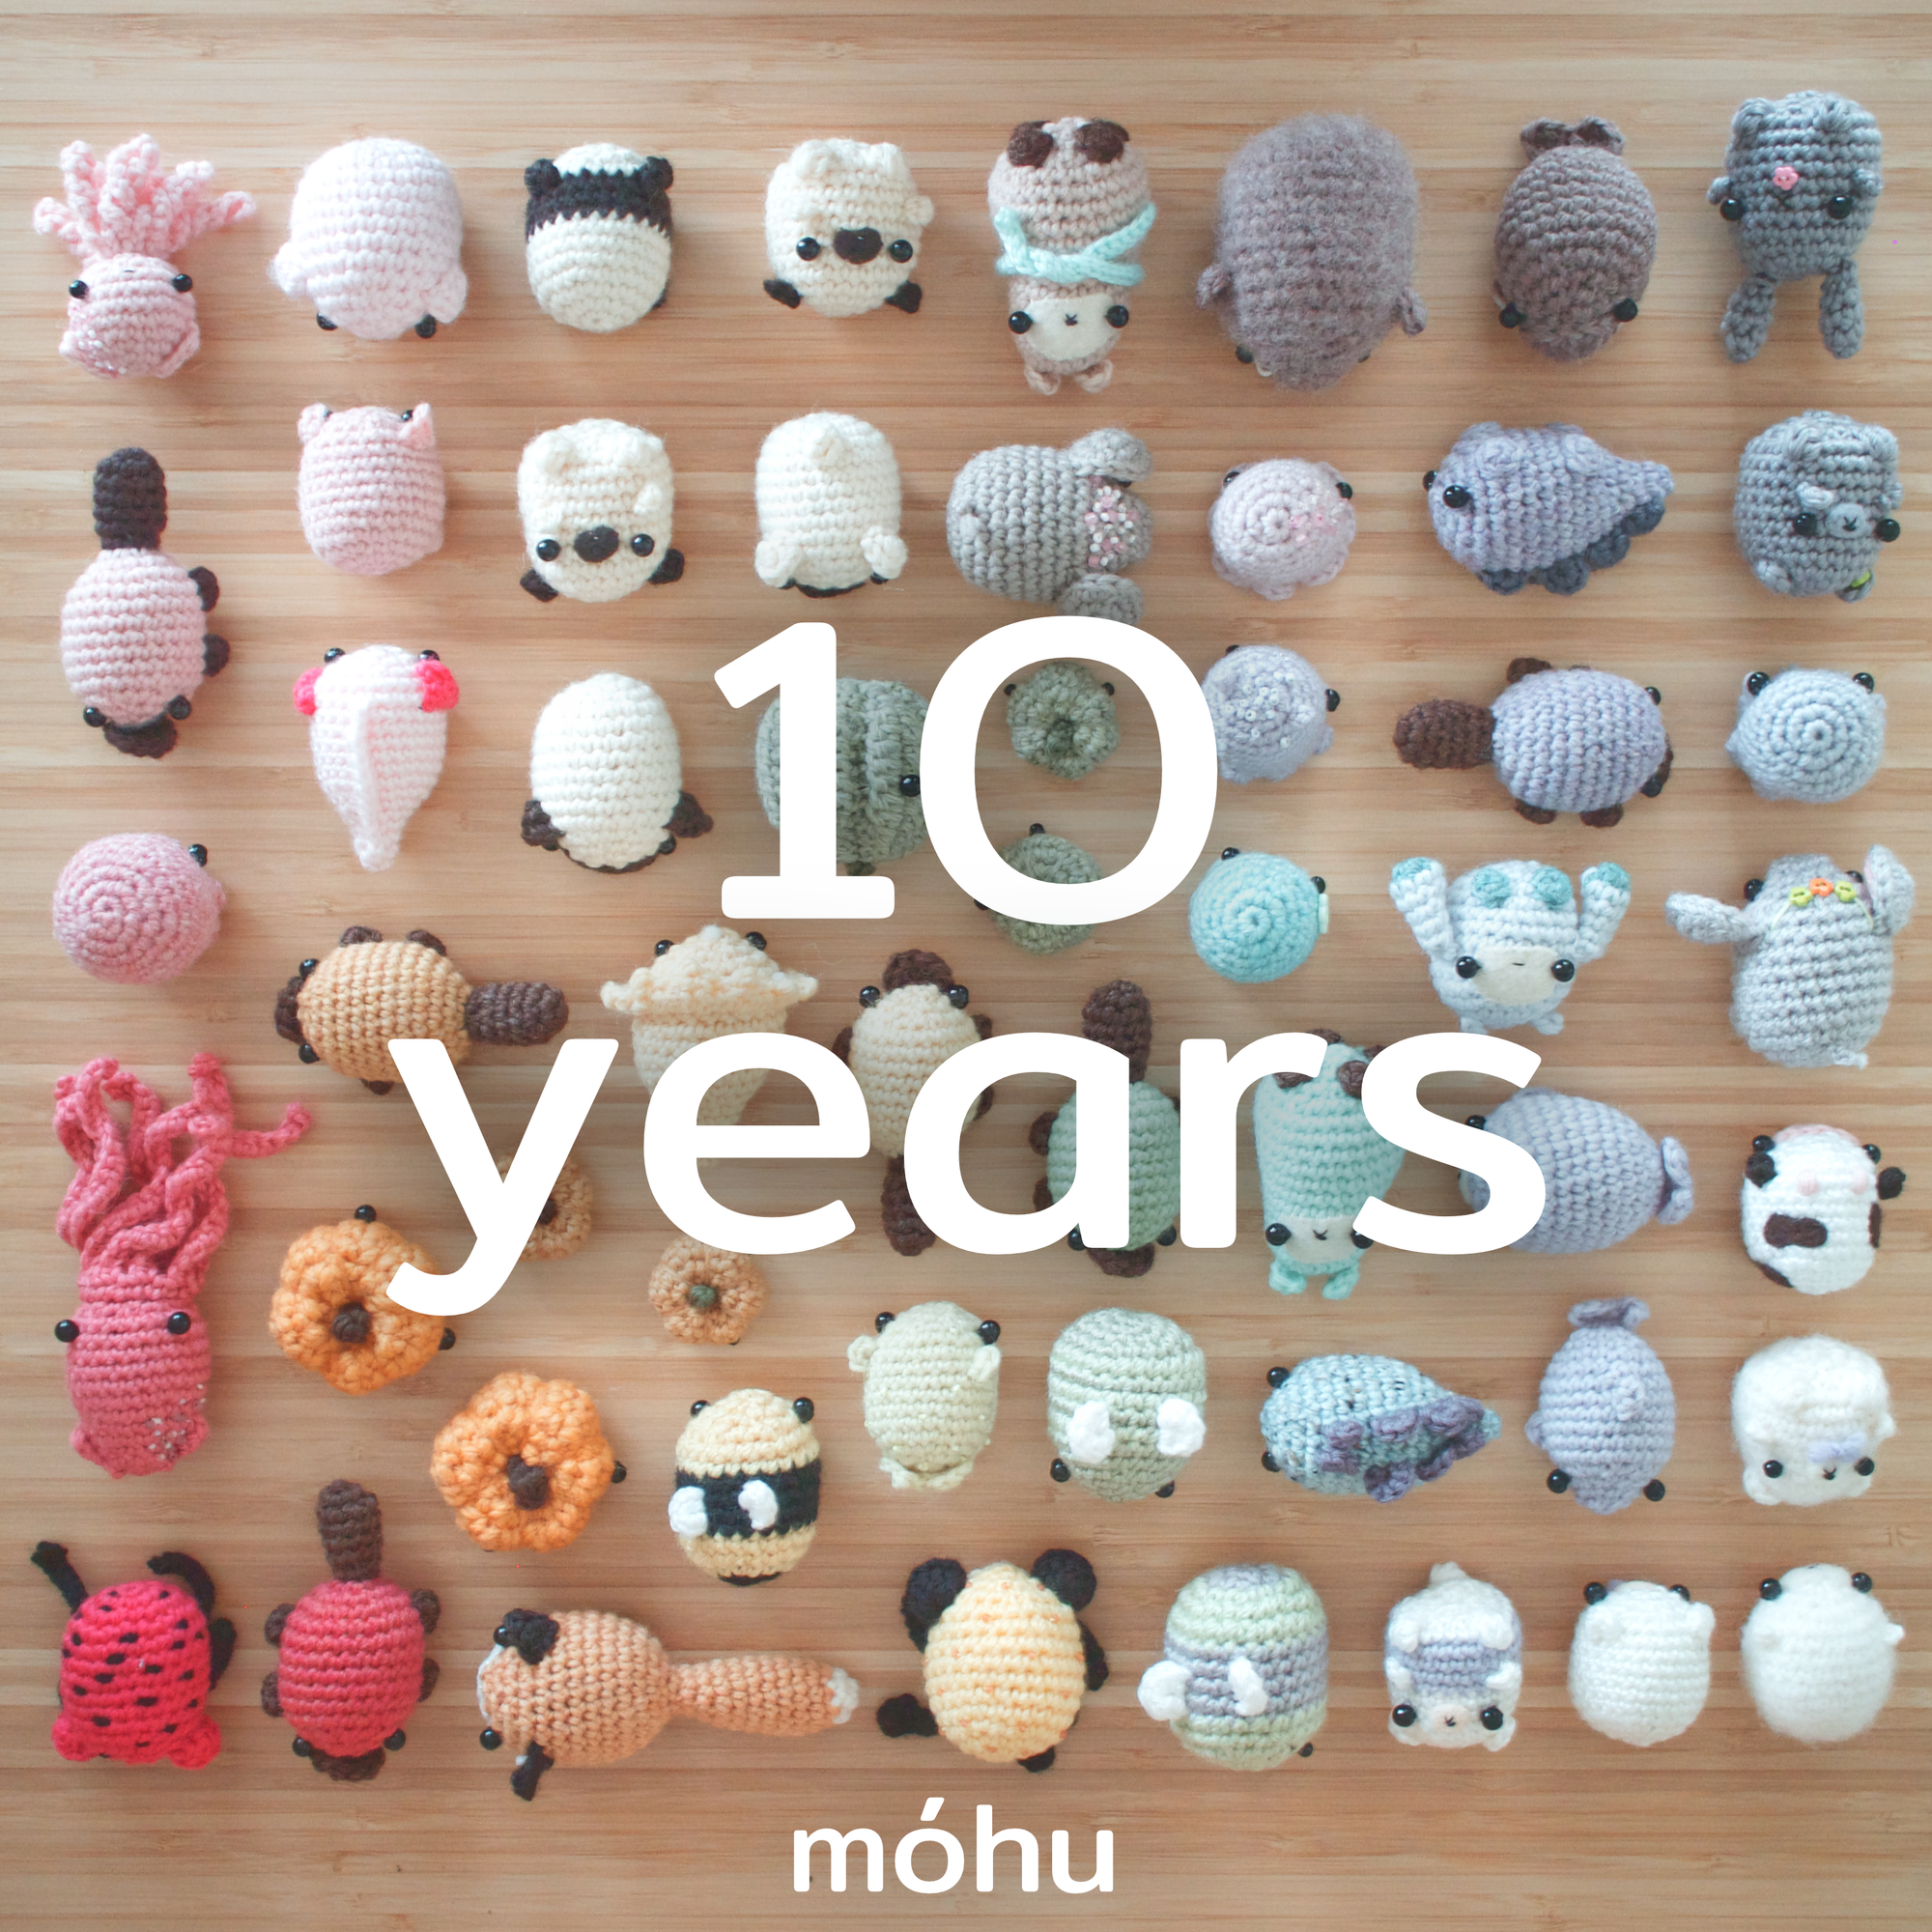 Mohu Store is 10 years old